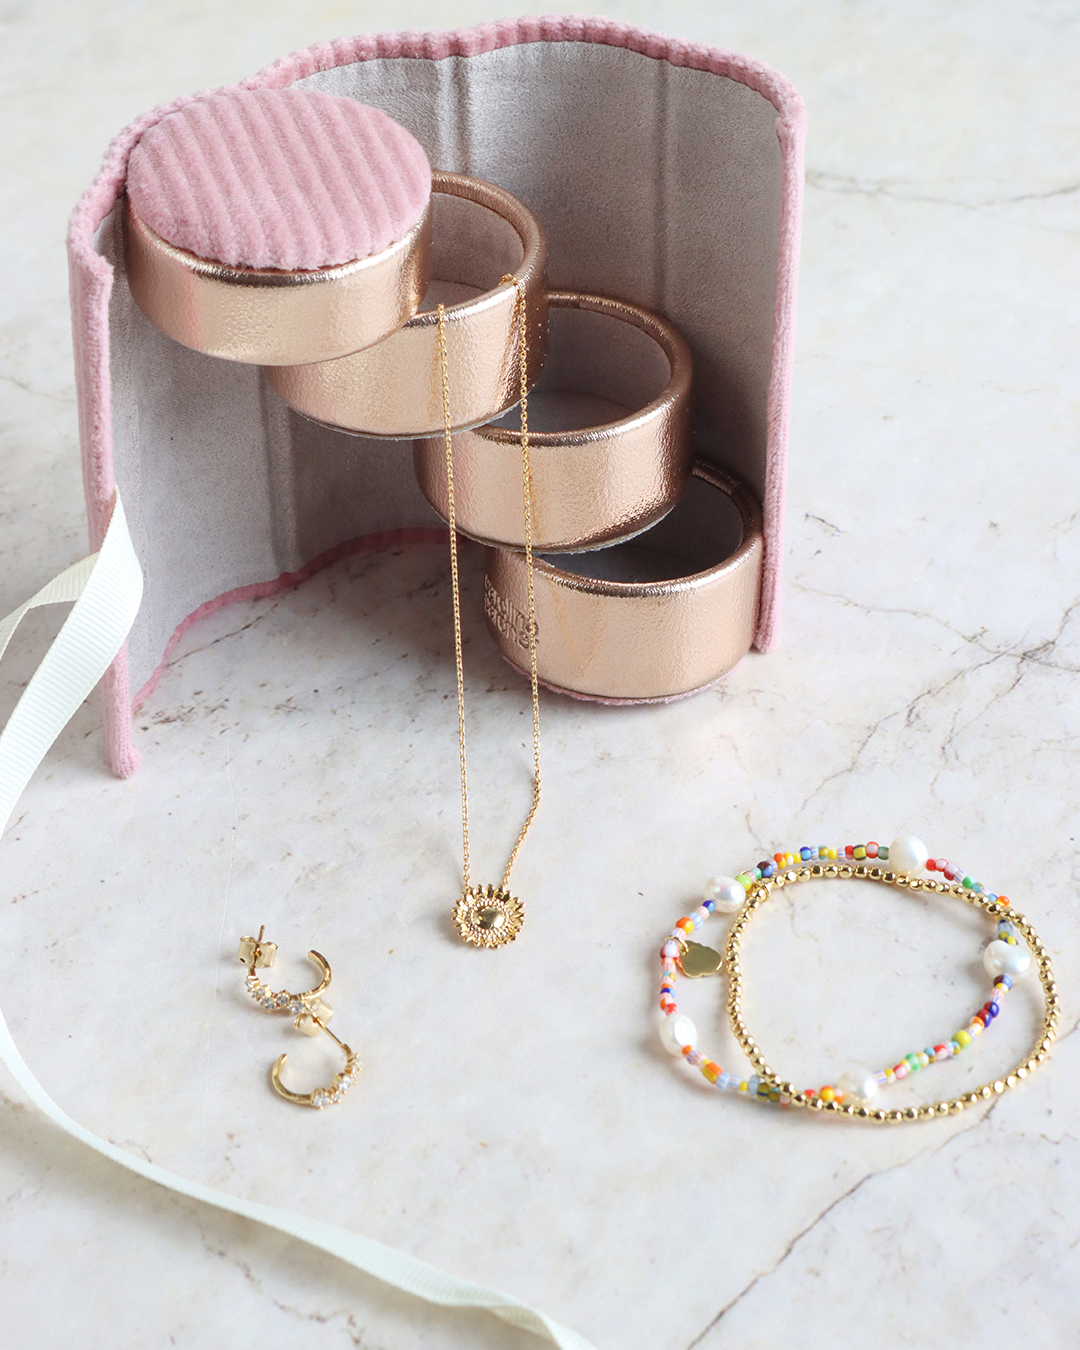 jewellery box and bracelets, necklaces